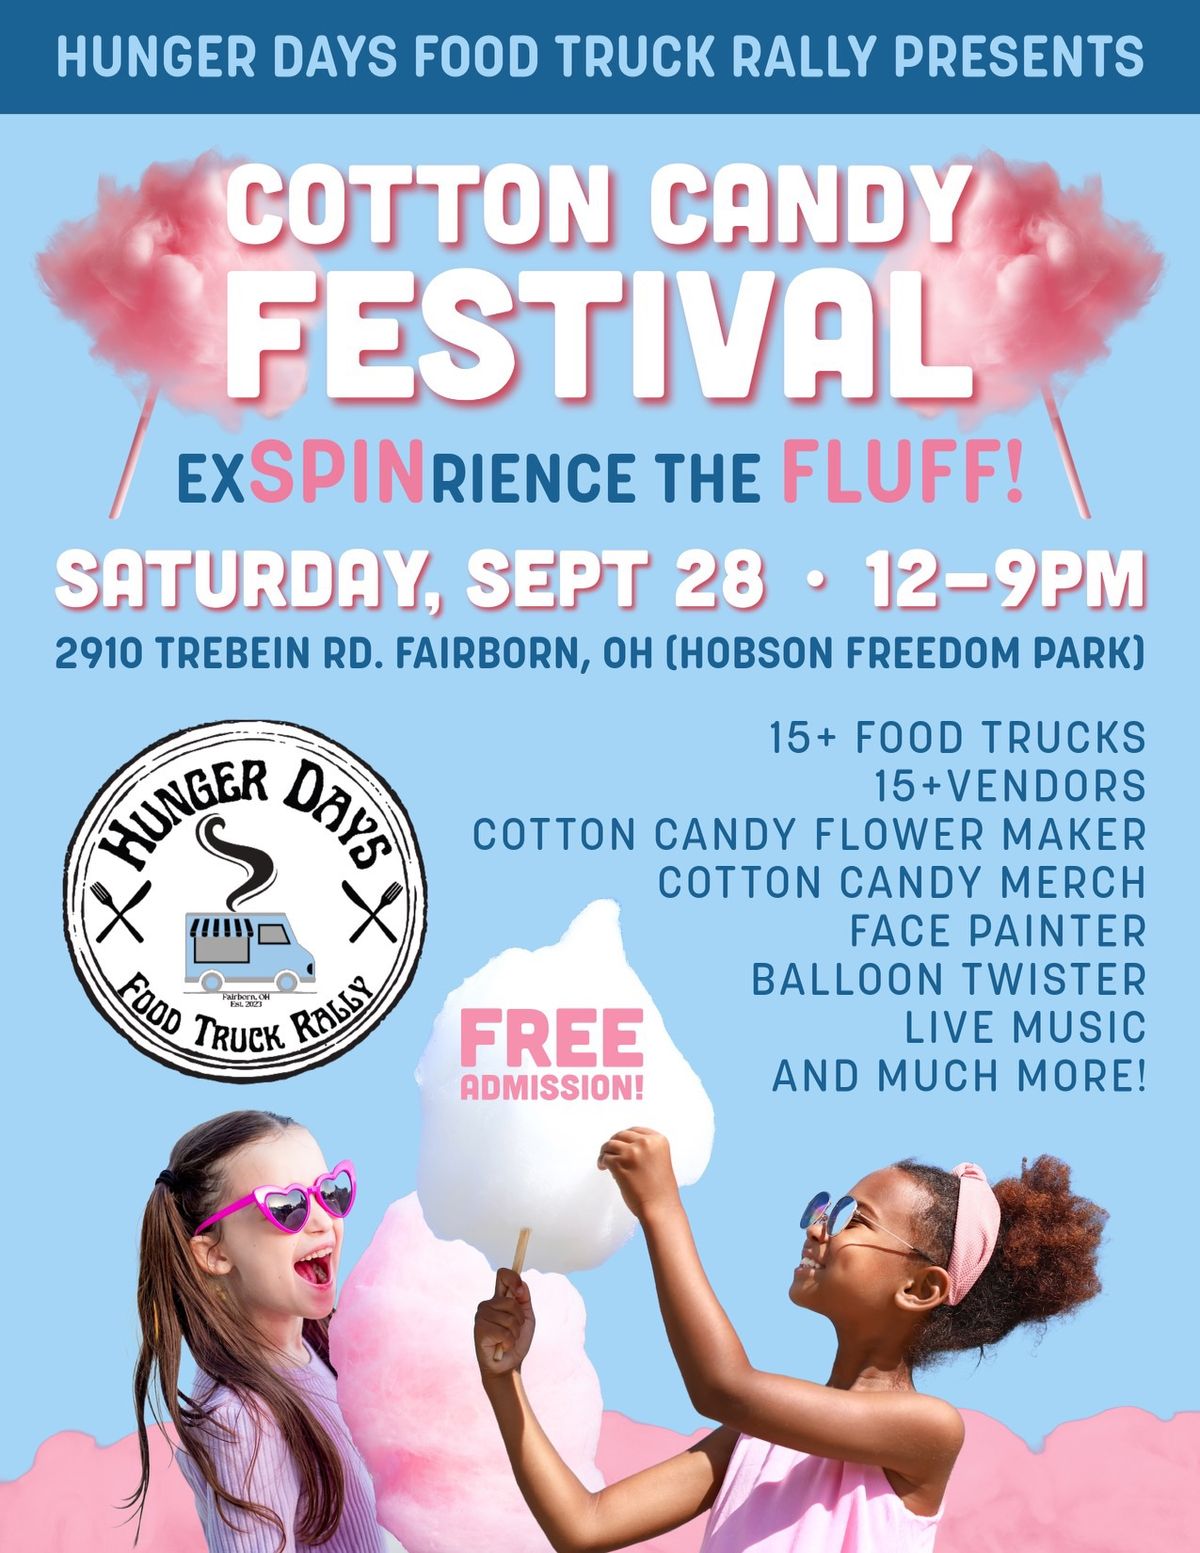 Hunger Days Food Truck Rally: Cotton Candy Festival 